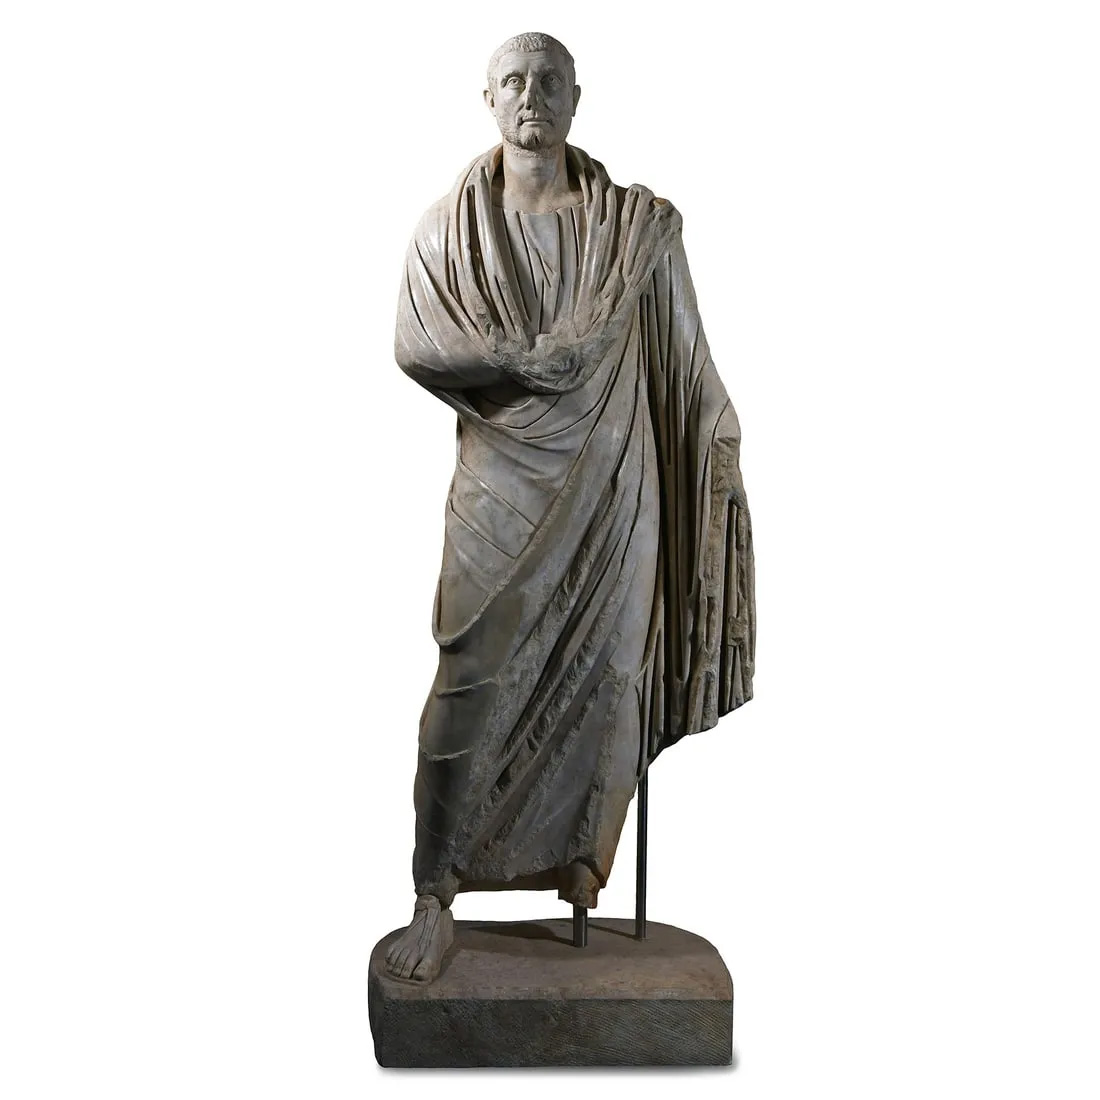 Life-size Roman marble statue of a magistrate, dating from the late 3rd or early 4th century, estimated at £200,000-£300,000 ($251,350-$377,025) at Timeline Auctions.